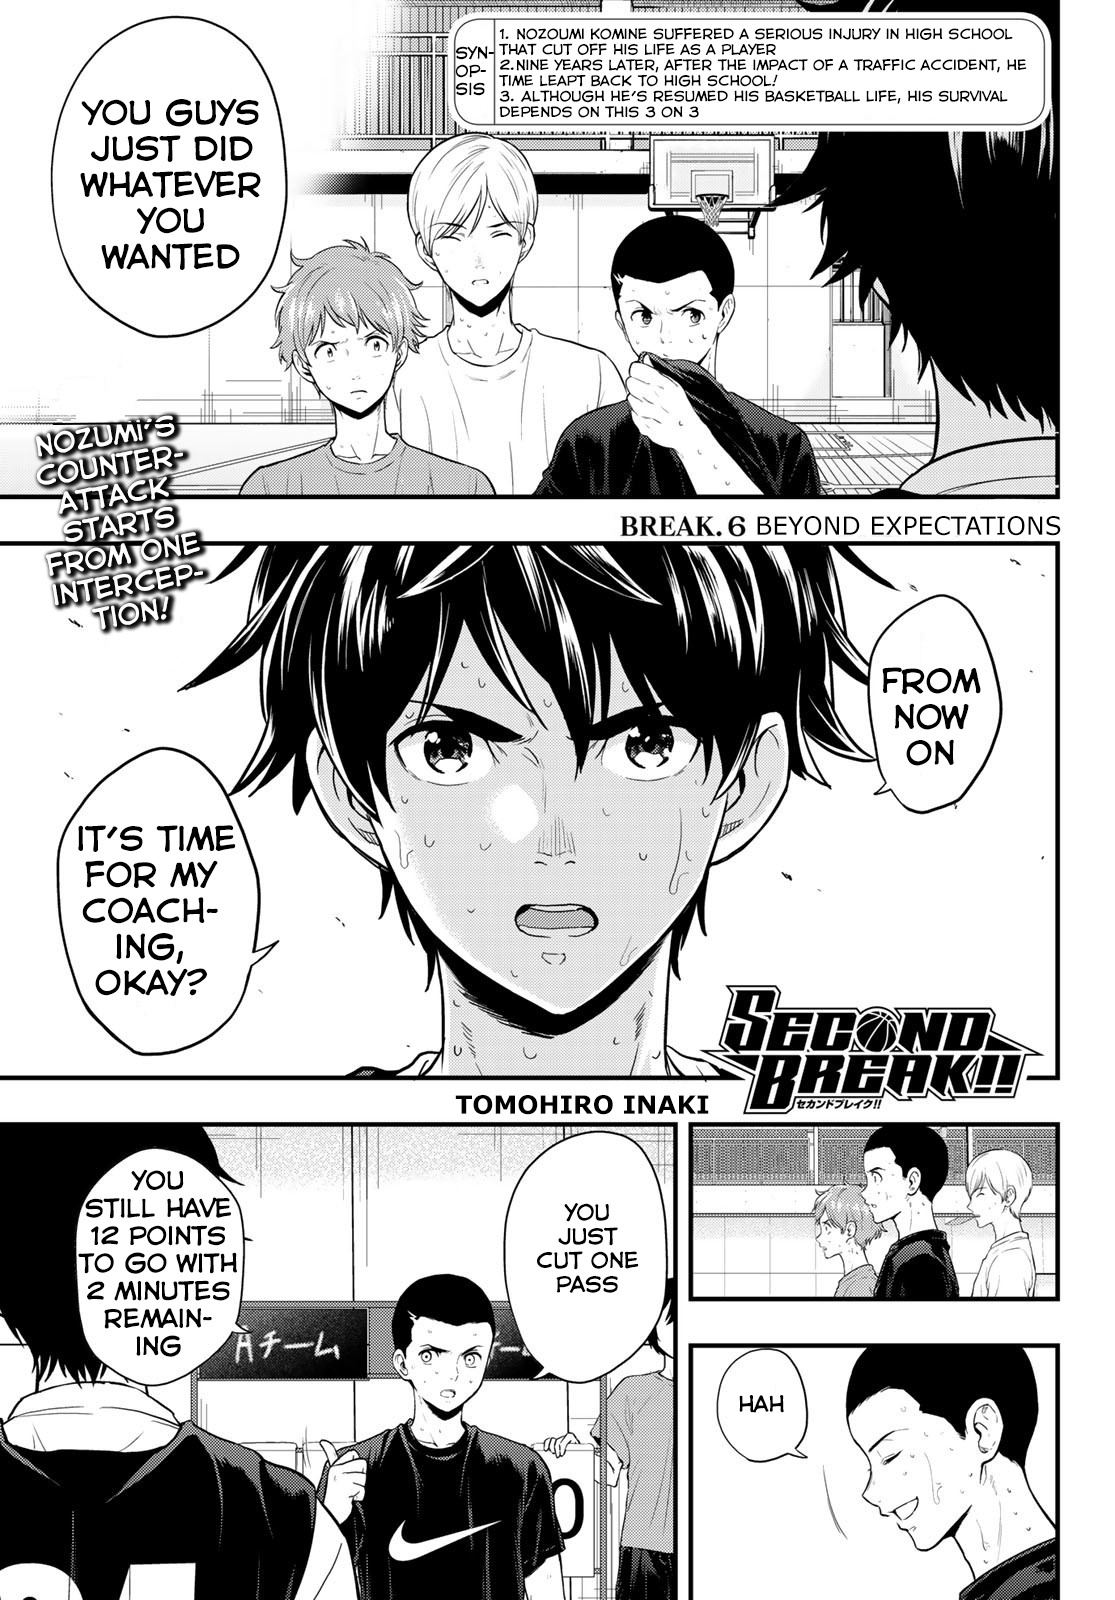 Second Break!! Vol.2 Chapter 6: Beyond Expectations - Picture 1